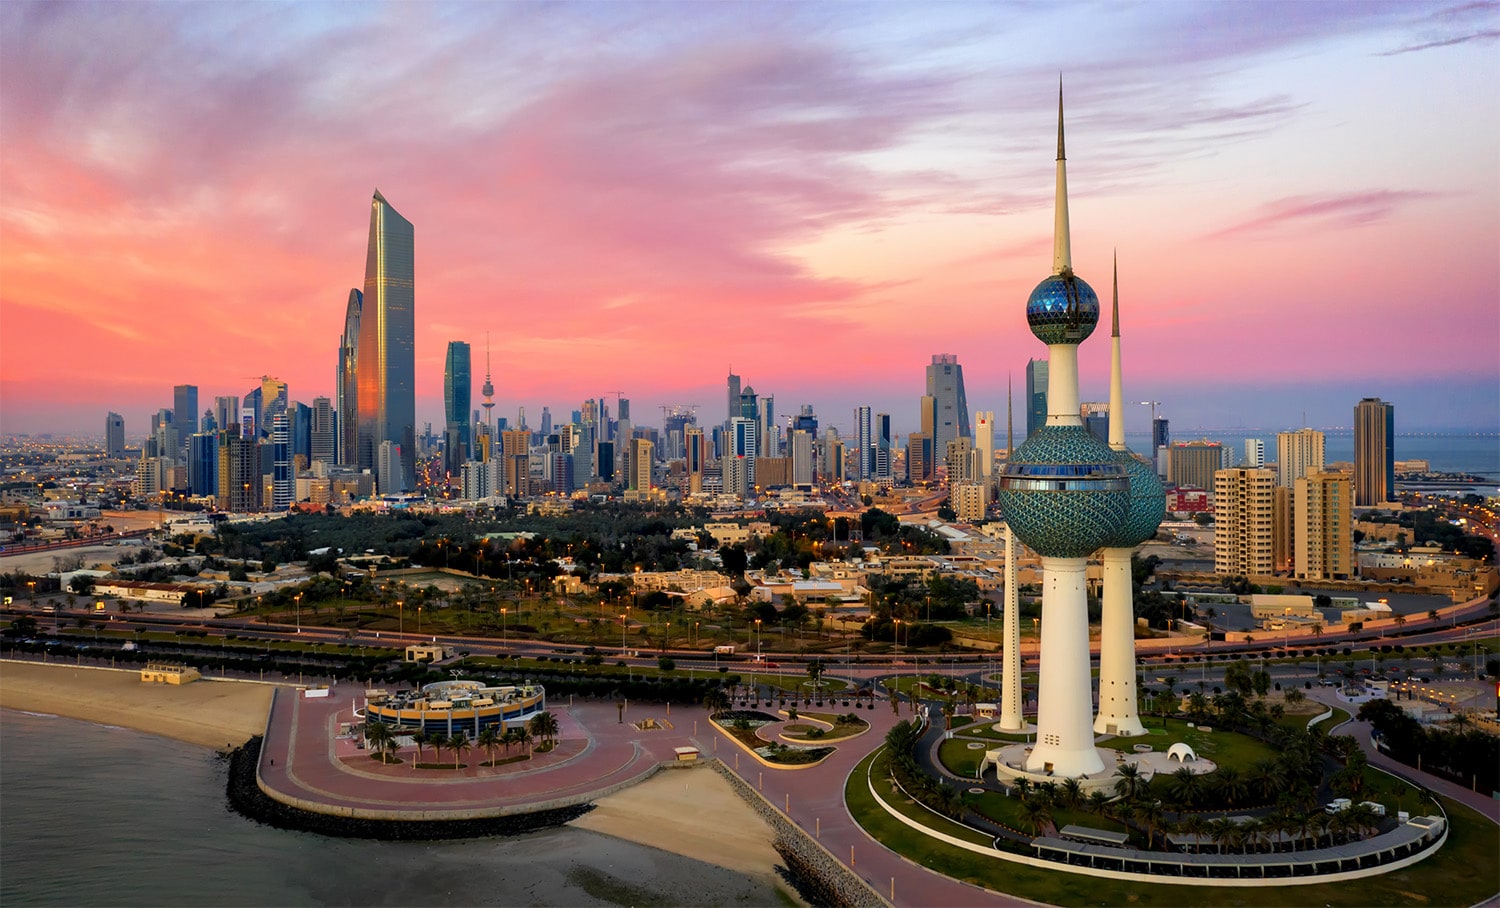 24 interesting facts about Kuwait